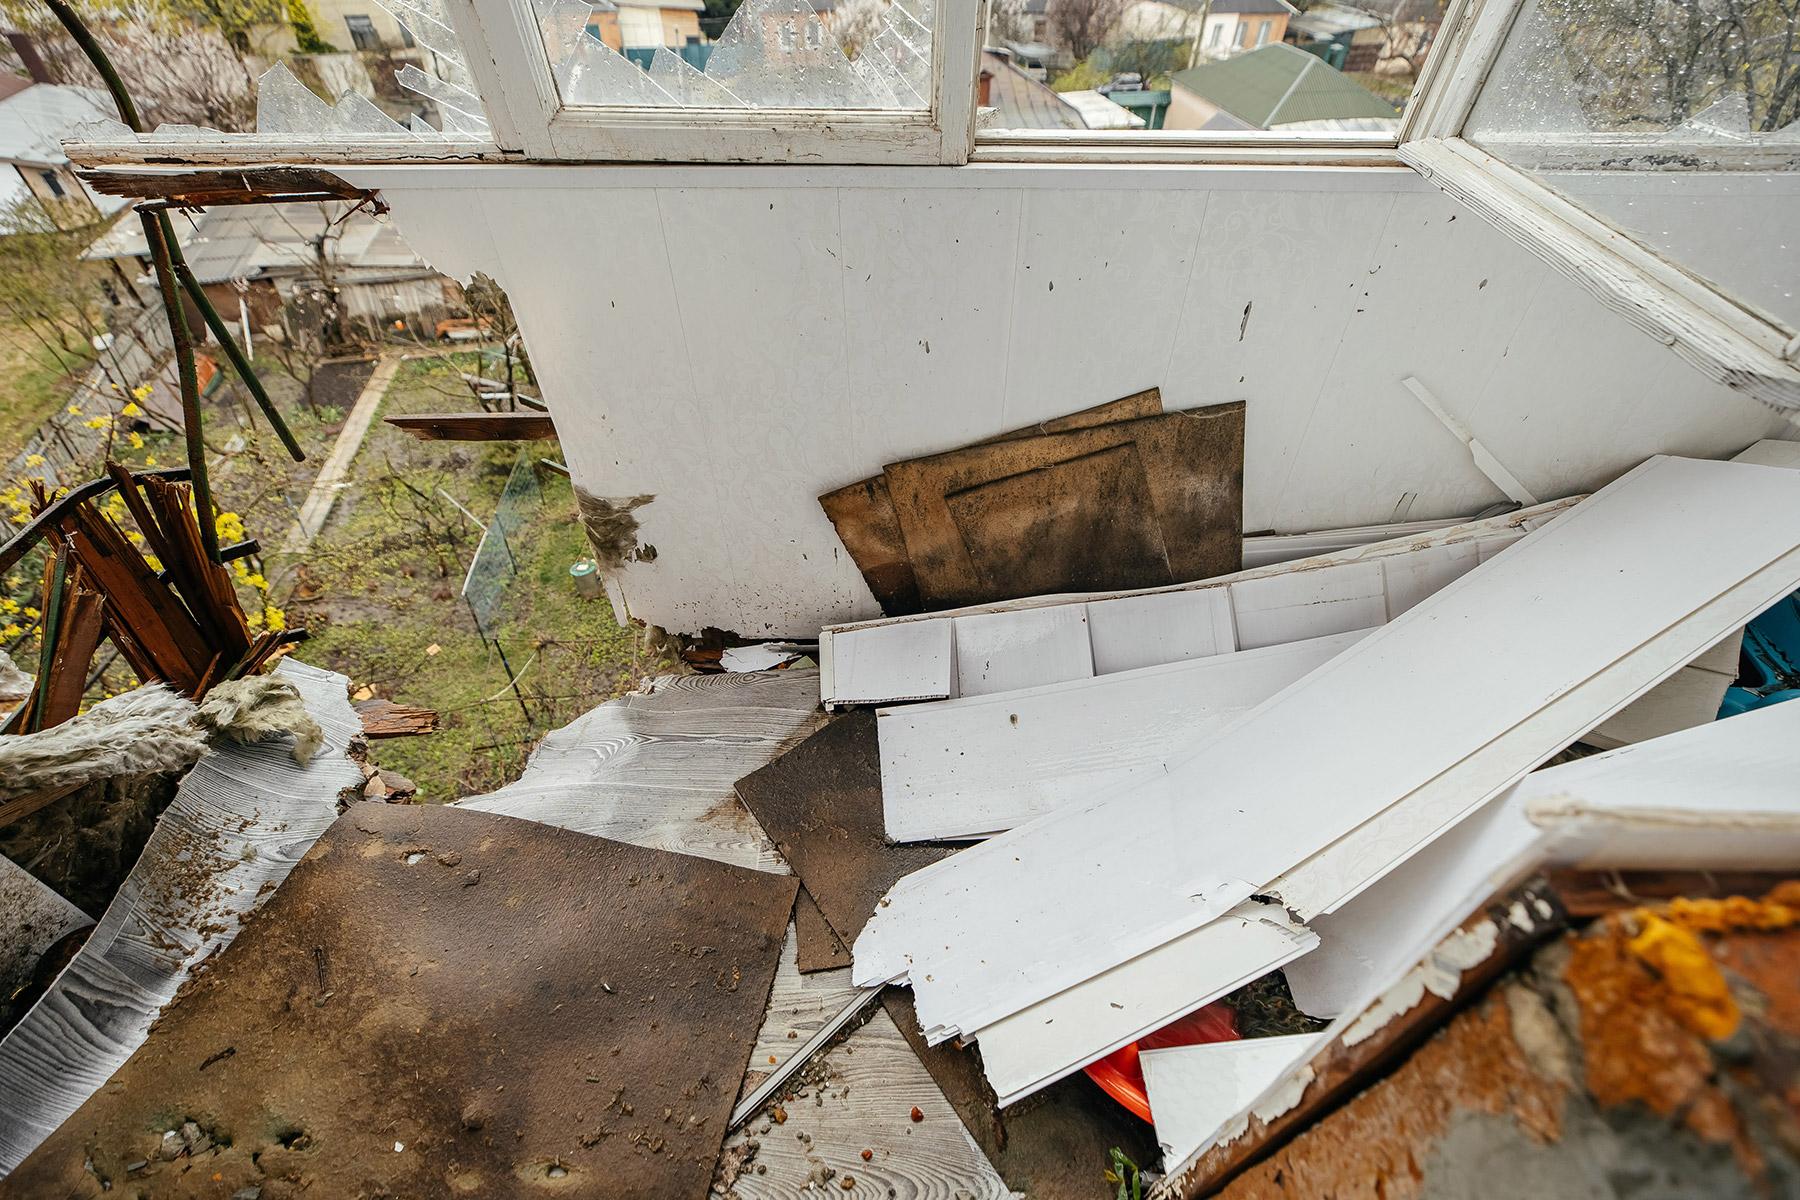 Destroyed buildings in Kharkiv’s Saltivka quarter. LWF has launched an initial tender for the rehabilitation of 50 flats and plans to renovate another 500 flats later, so displaced families in Kharkiv City can return to their homes. Photo: LWF/ Anantoliy Nazarenko